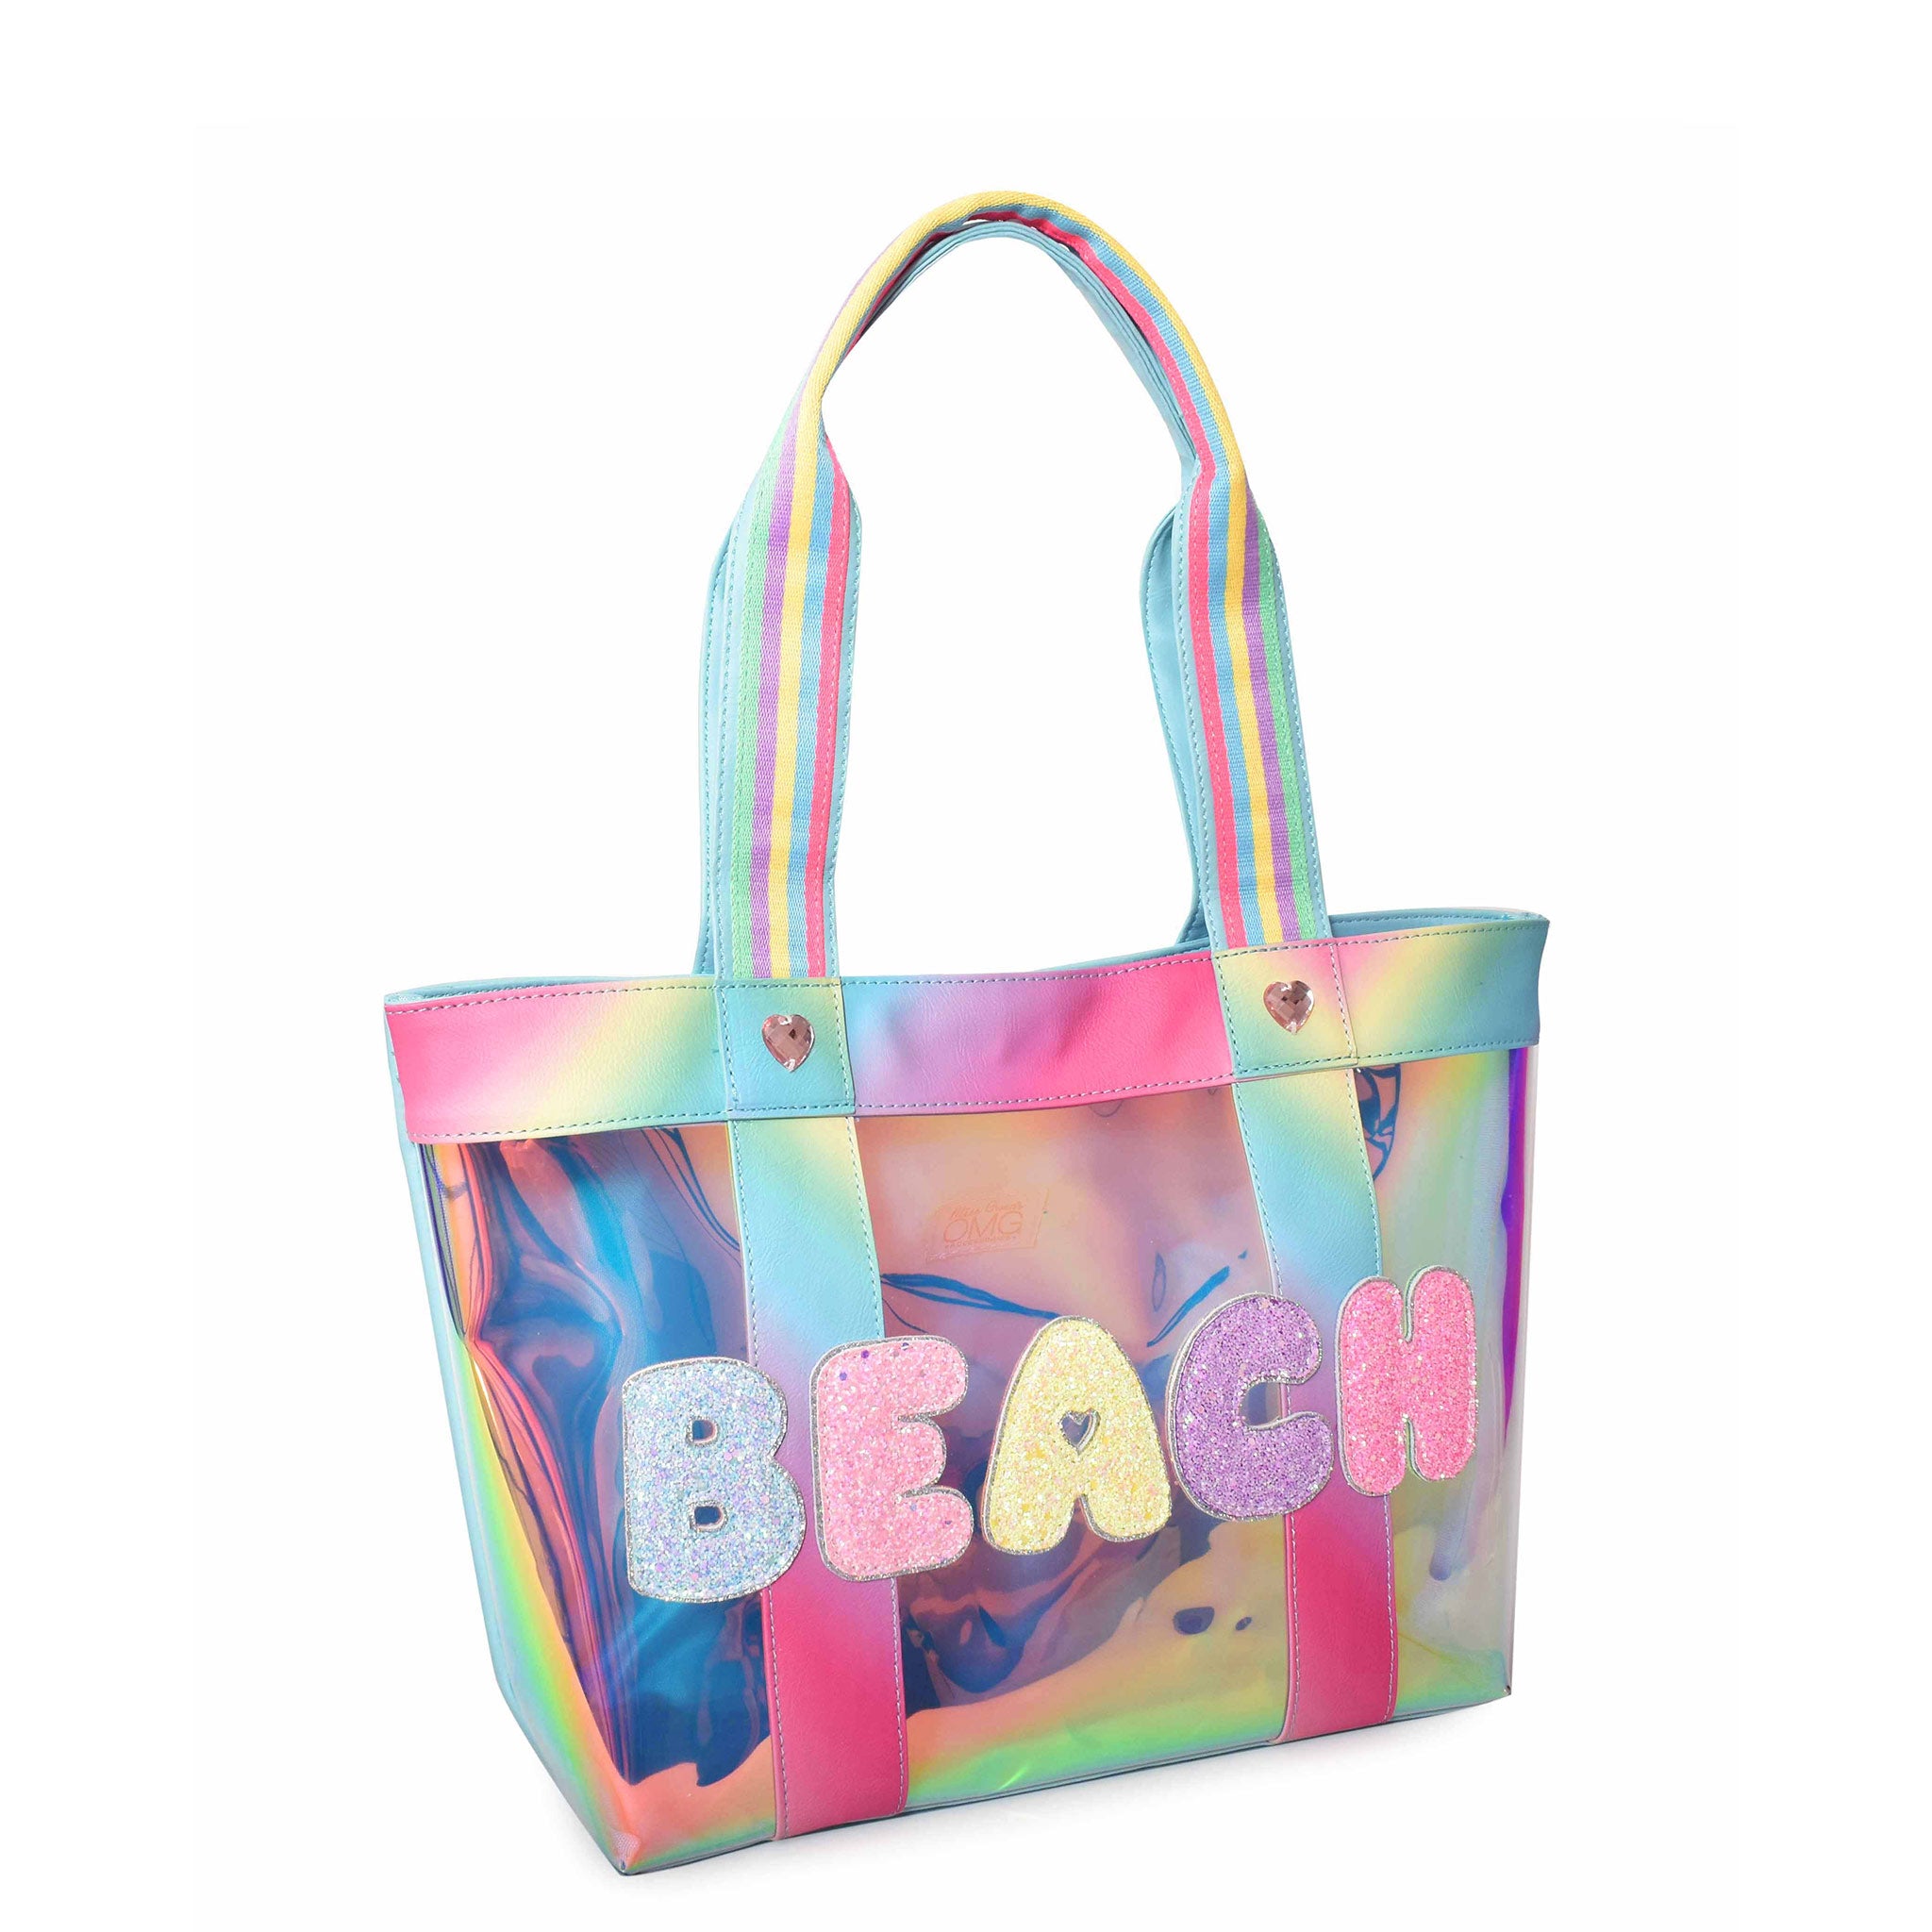 Side view of blue toned clear large beach tote embellished with glitter bubble letters 'BEACH' appliqués.